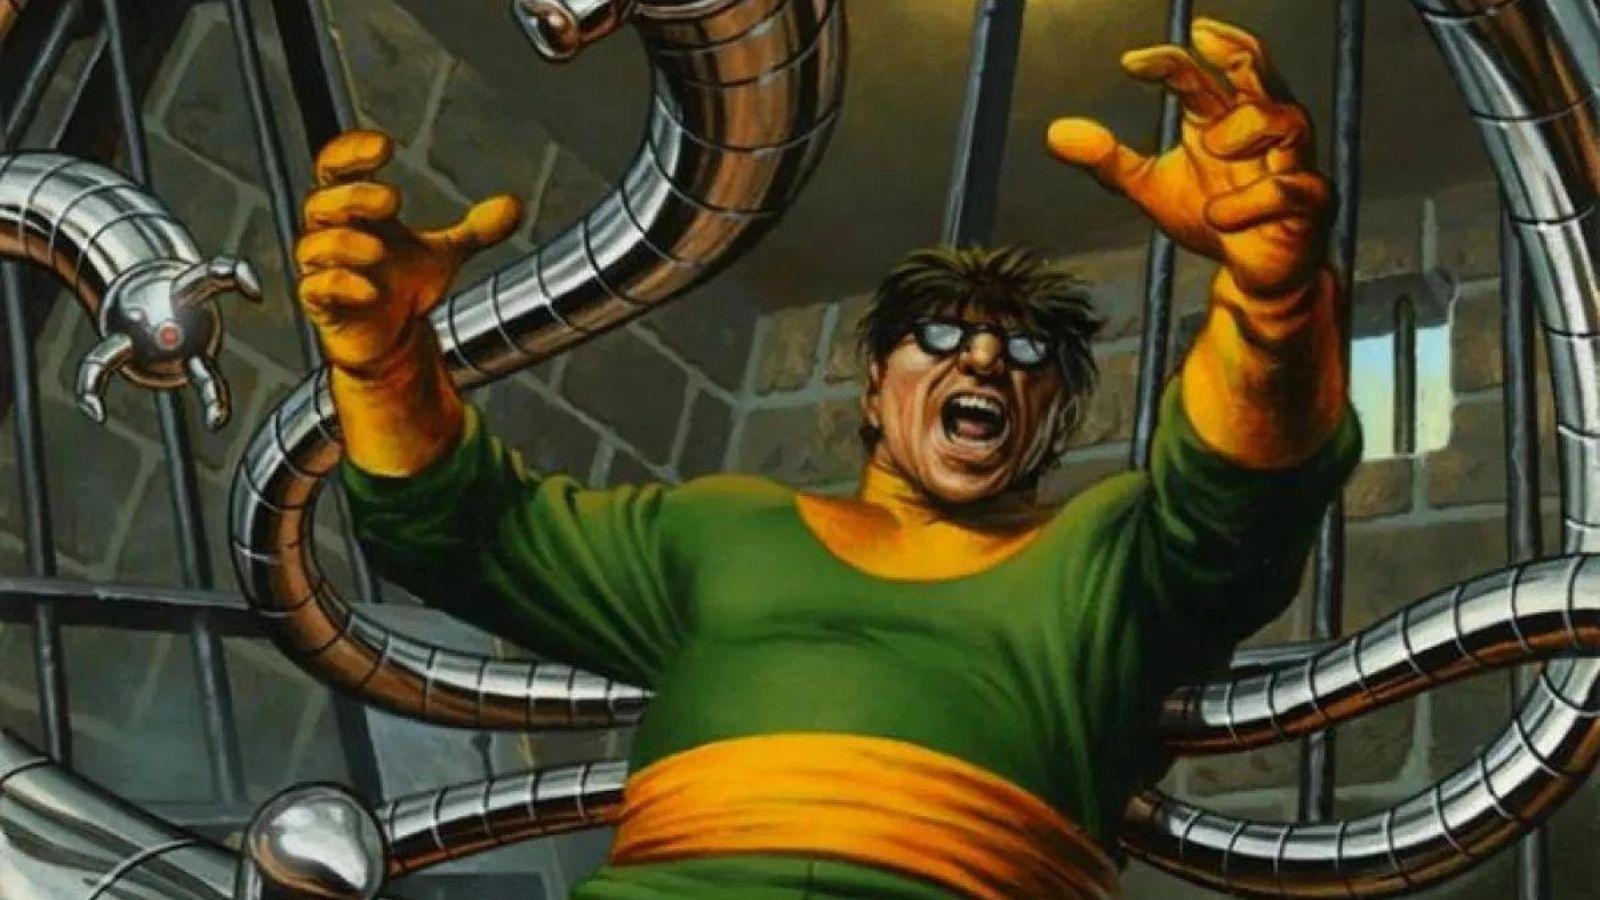 Marvel Snap player's Doctor Octopus move backfires in epic miscalculation -  Dexerto